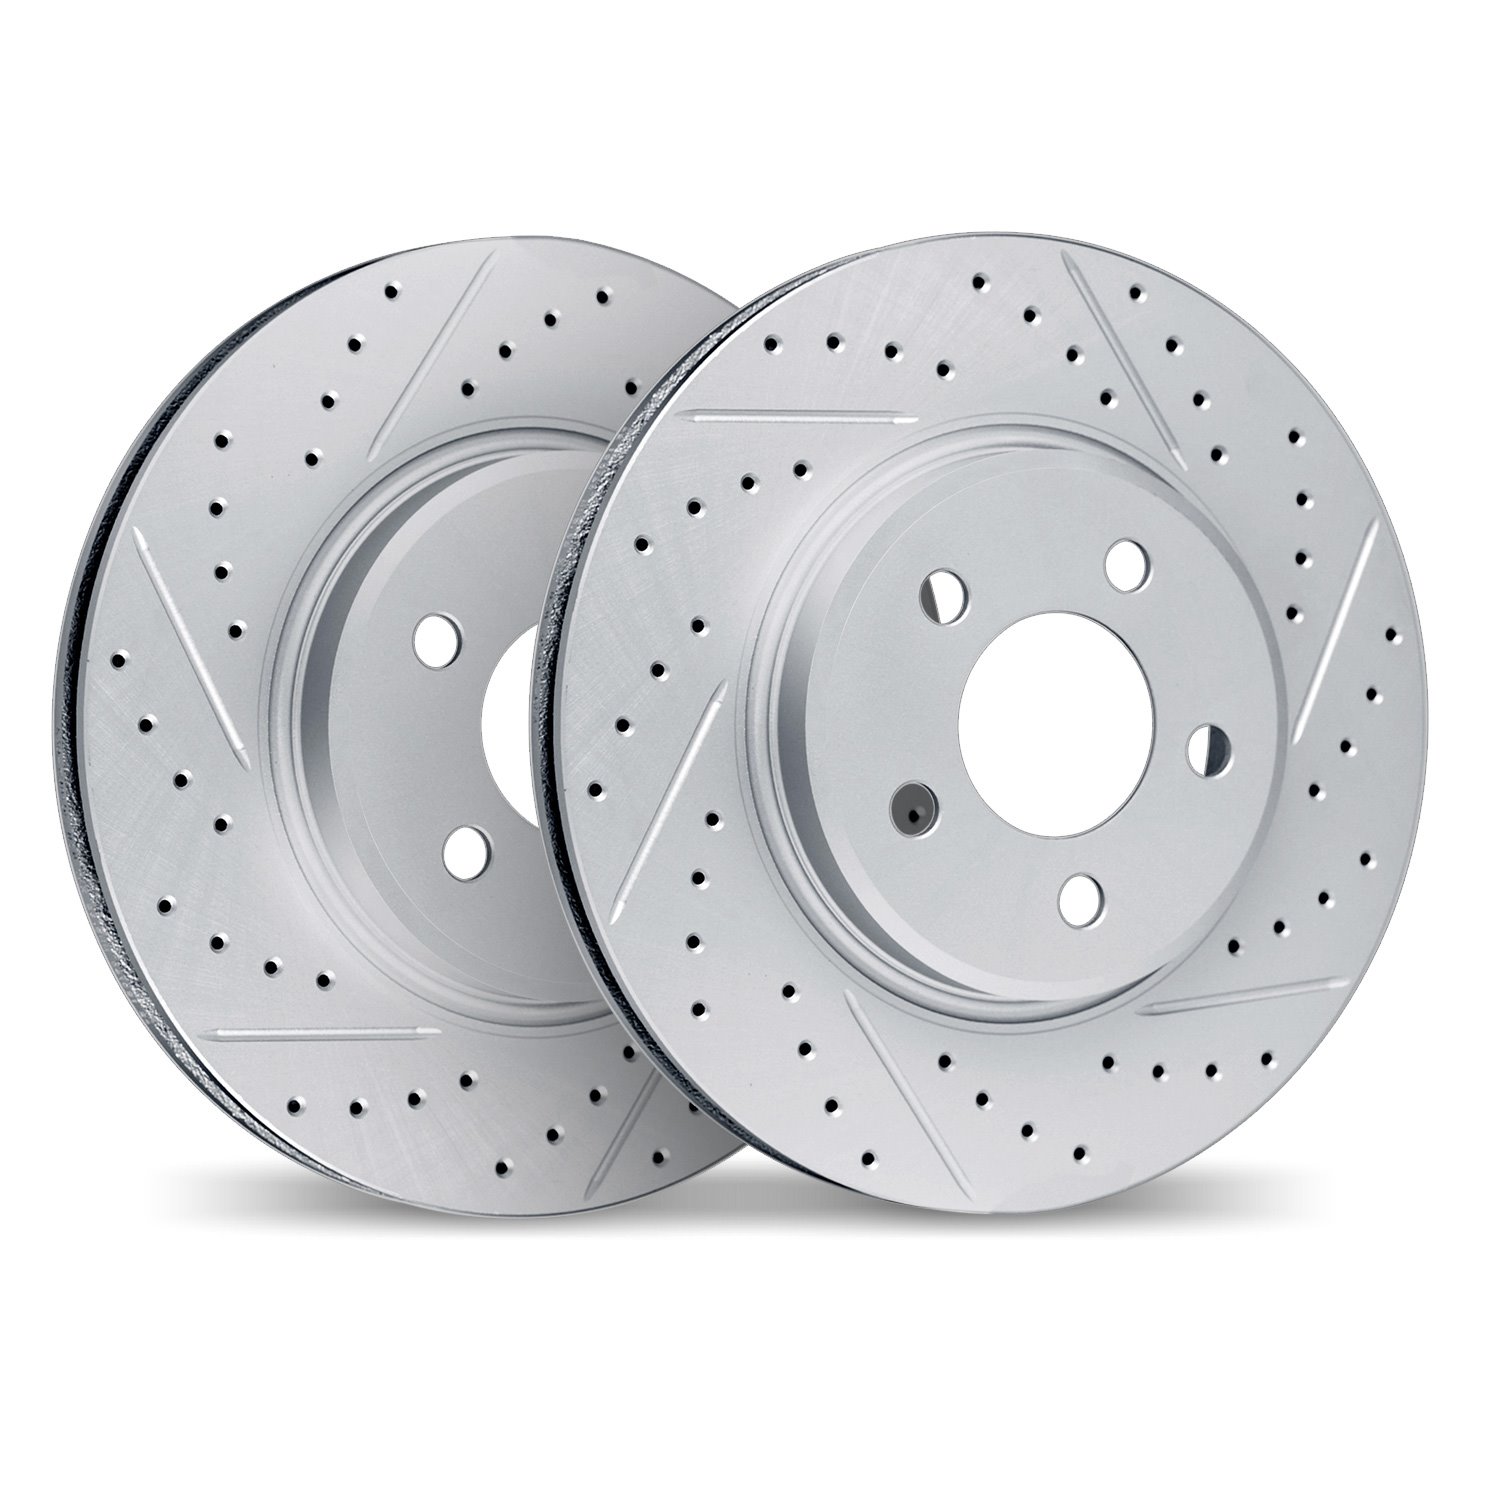 2002-63036 Geoperformance Drilled/Slotted Brake Rotors, Fits Select Mercedes-Benz, Position: Front